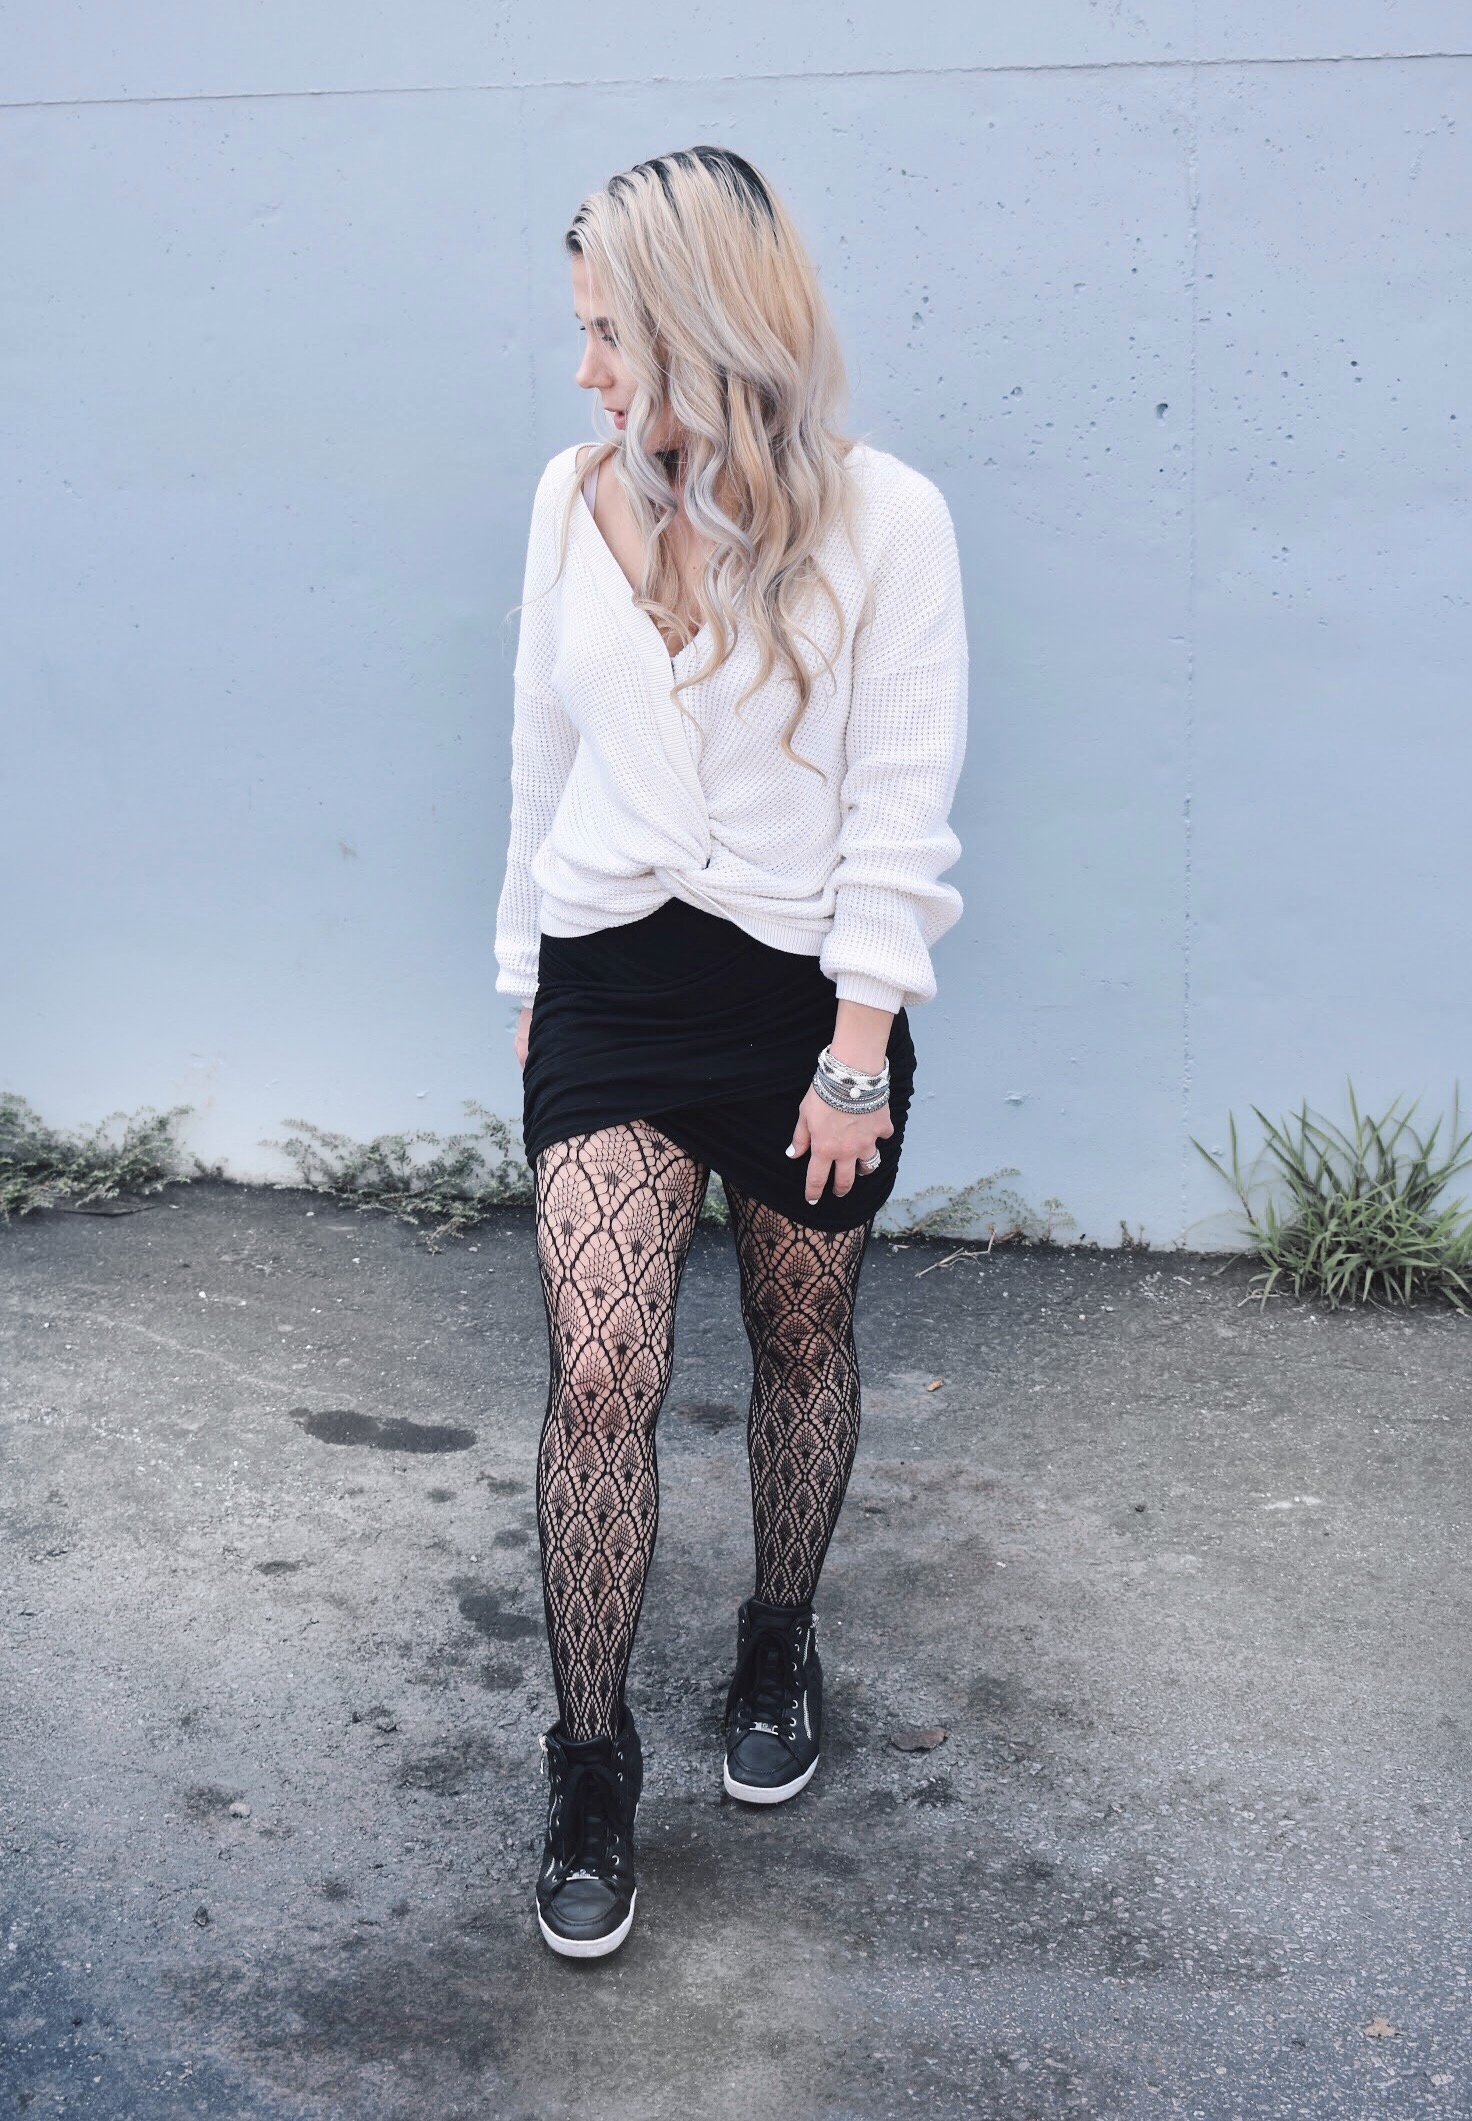 Fishnet Tights Outfit Ideas - Fall Street Style 2018 - Fashion blogger fishnet tights outfit showing how to use fishnet tights to transition your wardrobe to fall. Fishnet tights and mini skirt outfit helps you with how to wear a mini skirt in fall. Plus, this twist-front sweater is the cutest you'll ever see! Check out this Street Style Fall 2018 inspiration! #LikeTKit #Fishnets #FishnetTights #FallFashion #WomensFashion